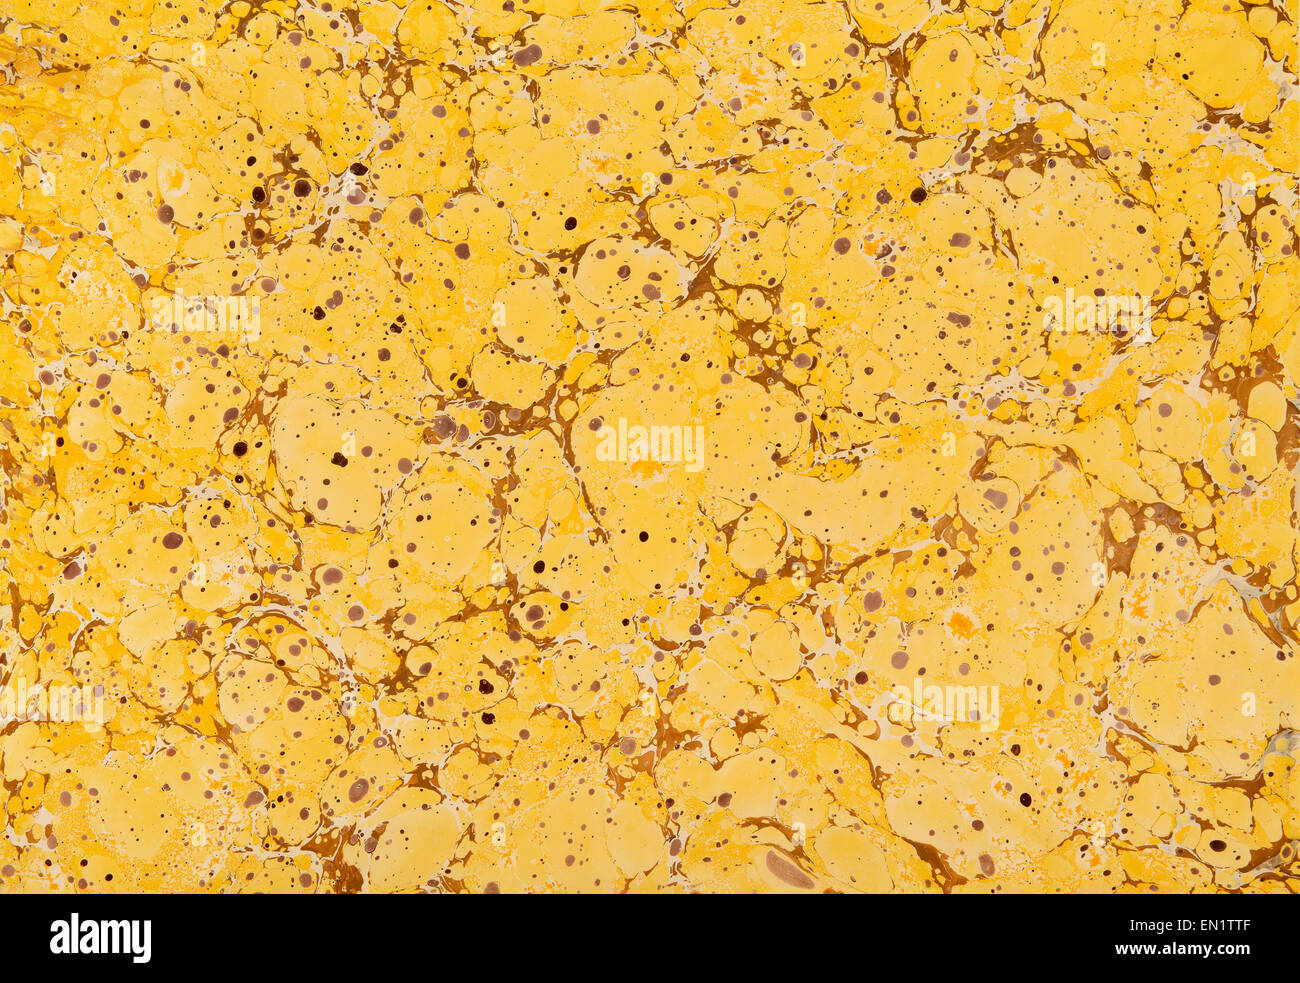 Yellow and brown marble paper in a full frame background Stock Photo